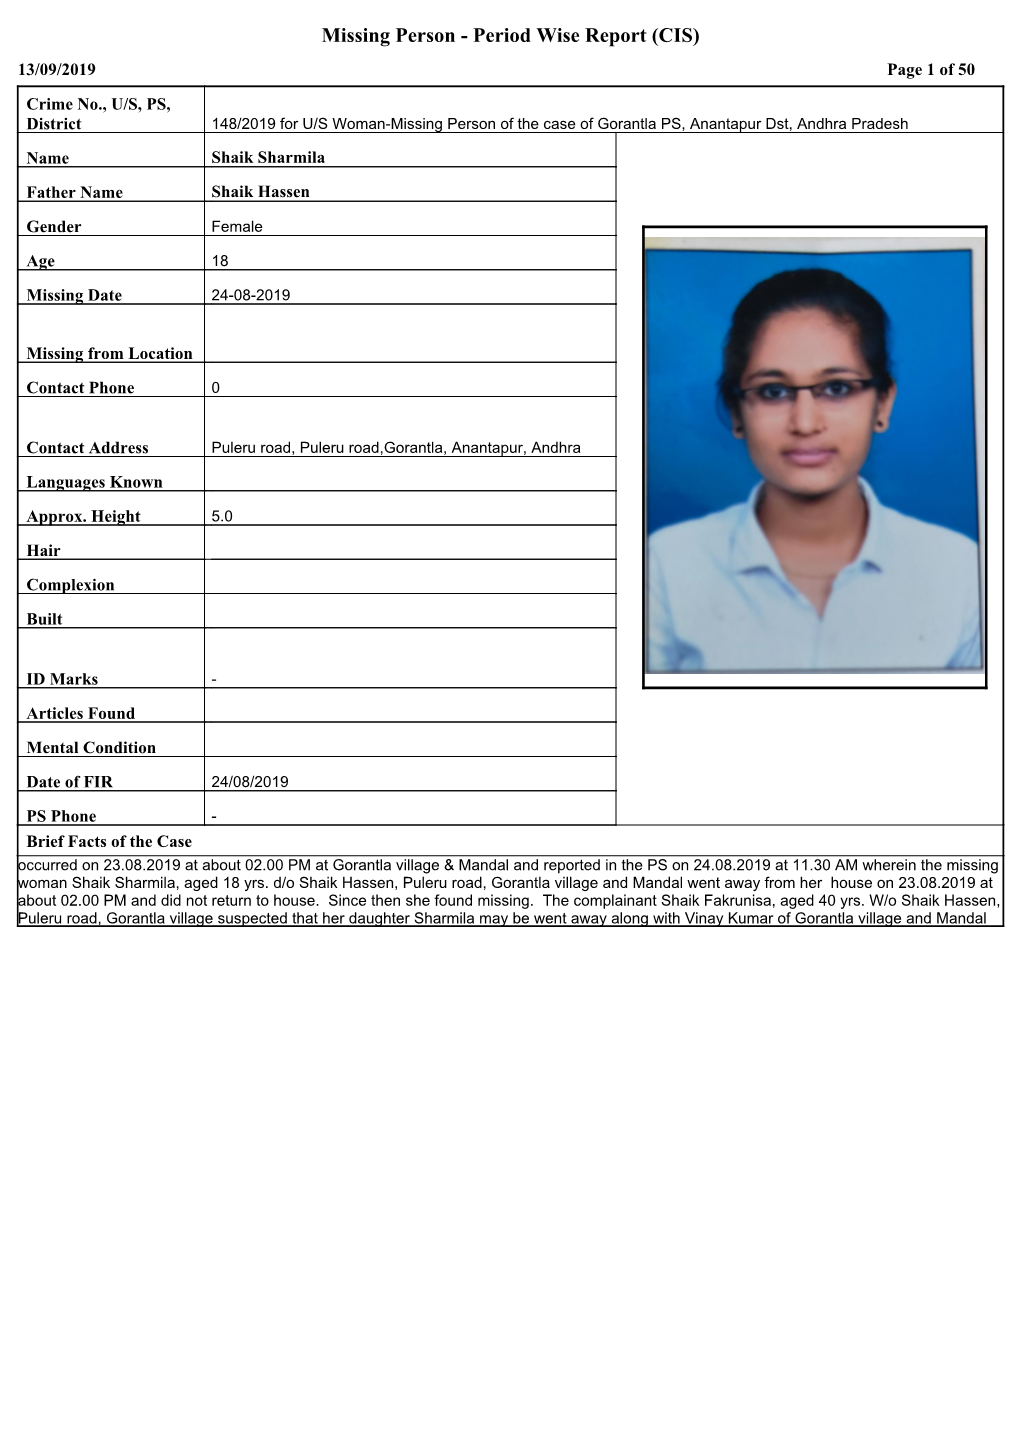 Missing Person - Period Wise Report (CIS) 13/09/2019 Page 1 of 50